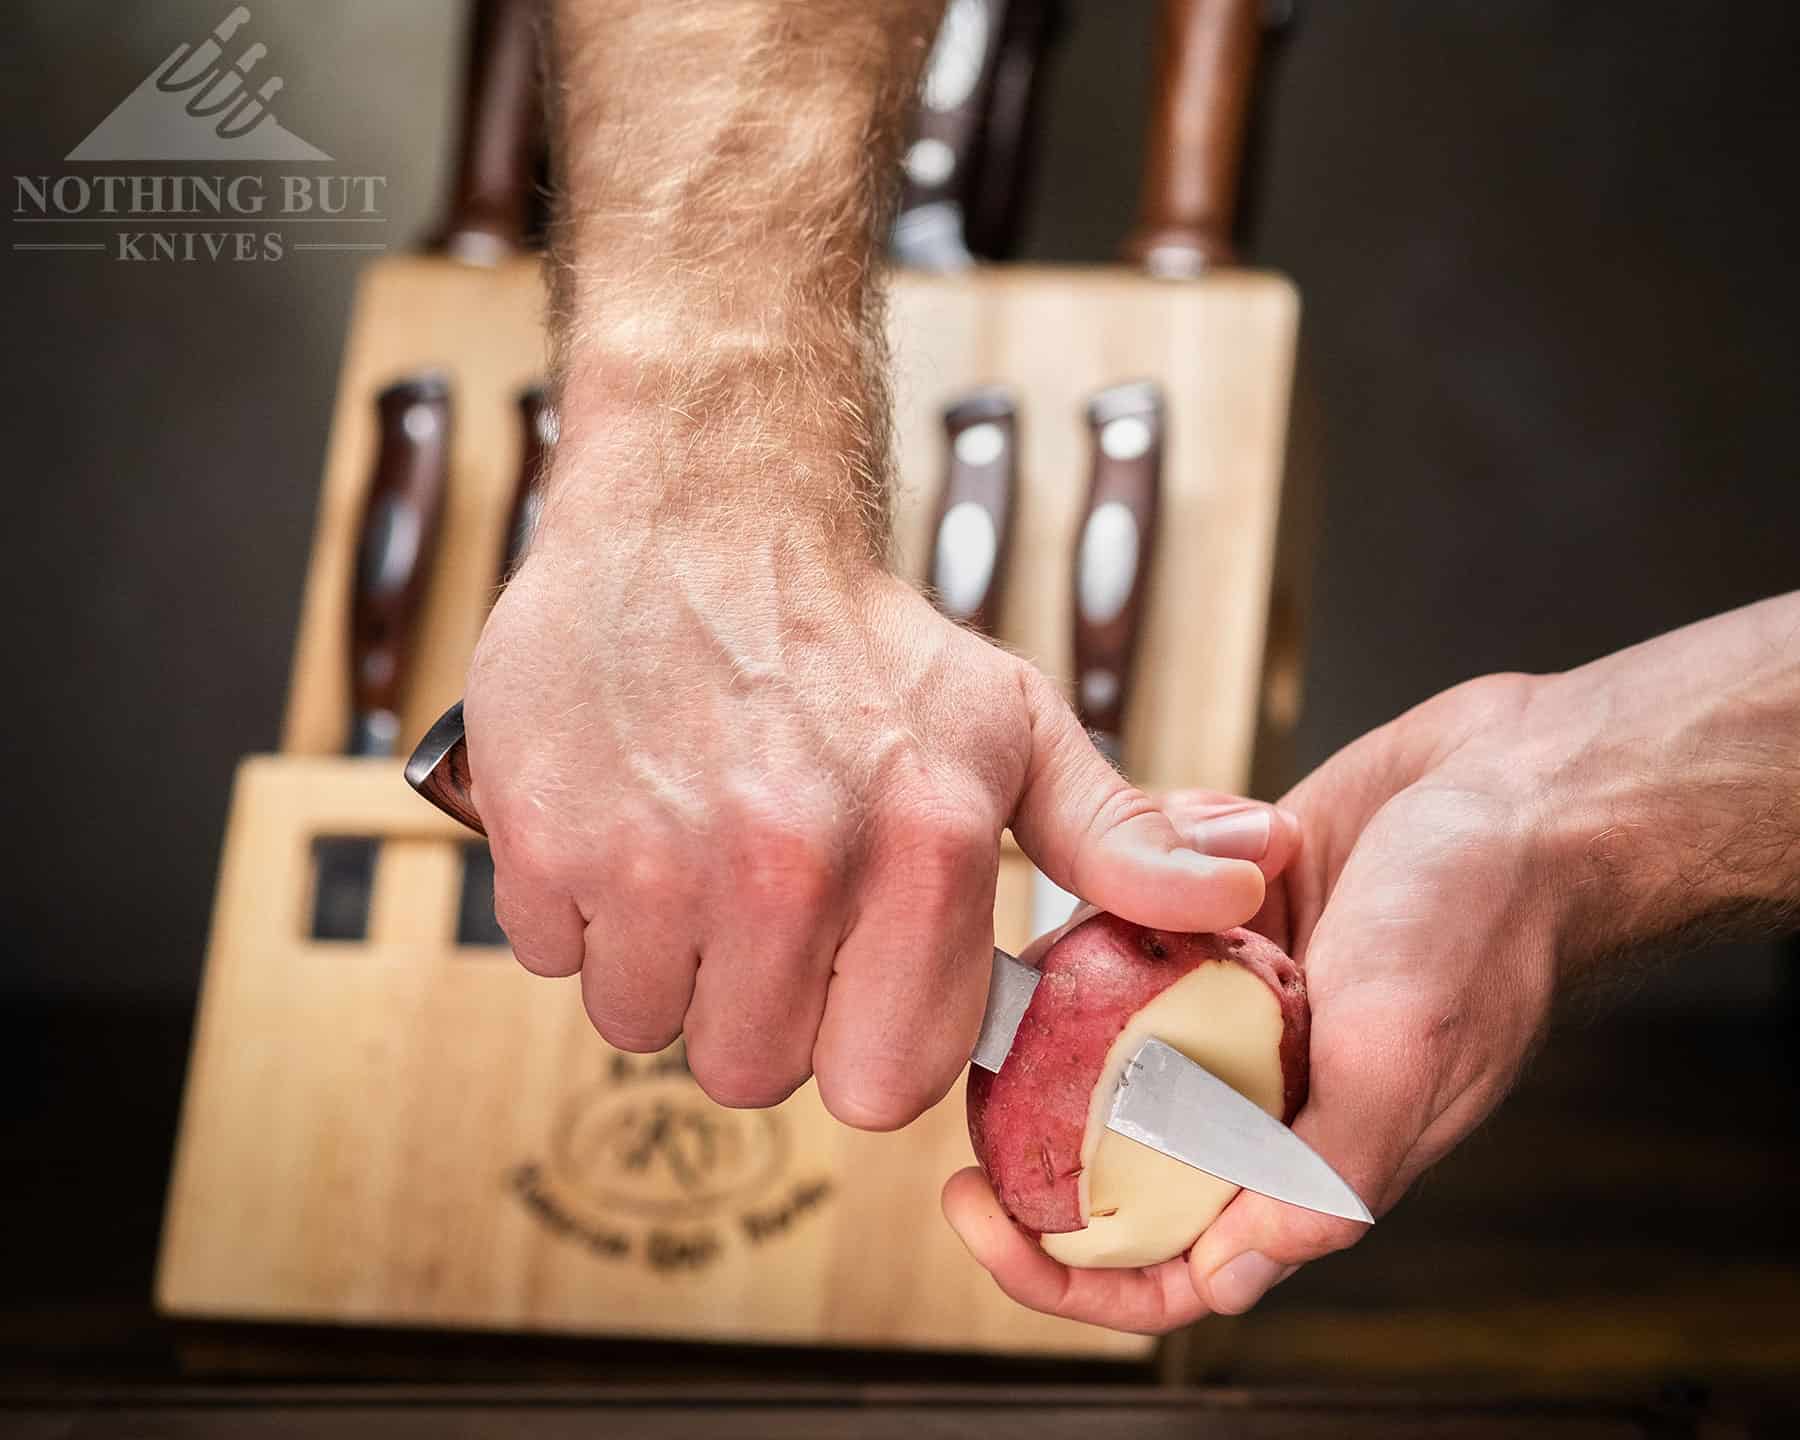 The comfort of the Bavarian Knife Works knives helps with detailin work like peeling an apple. 